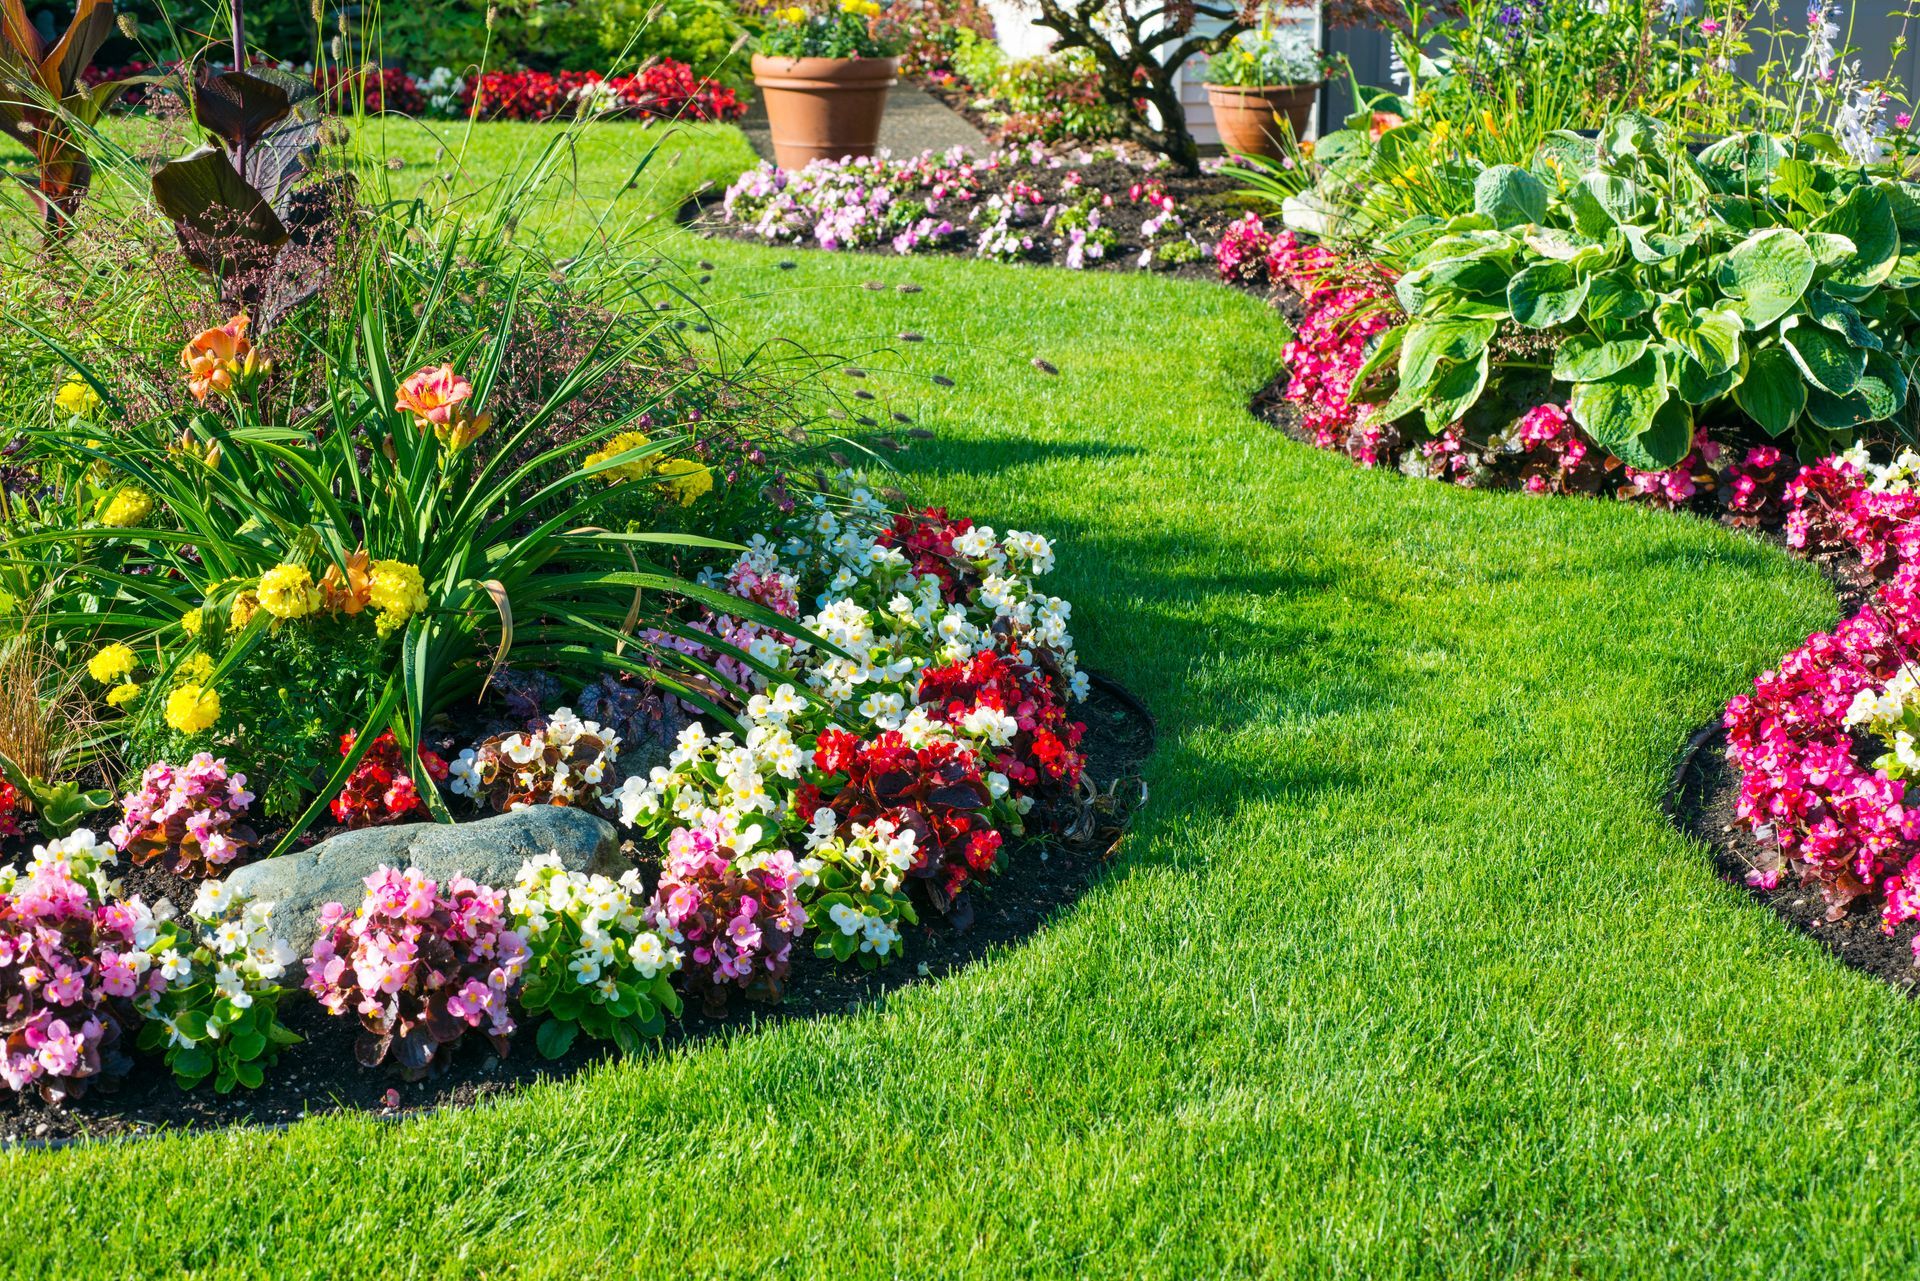 a garden filled with lots of colorful flowers and potted plants